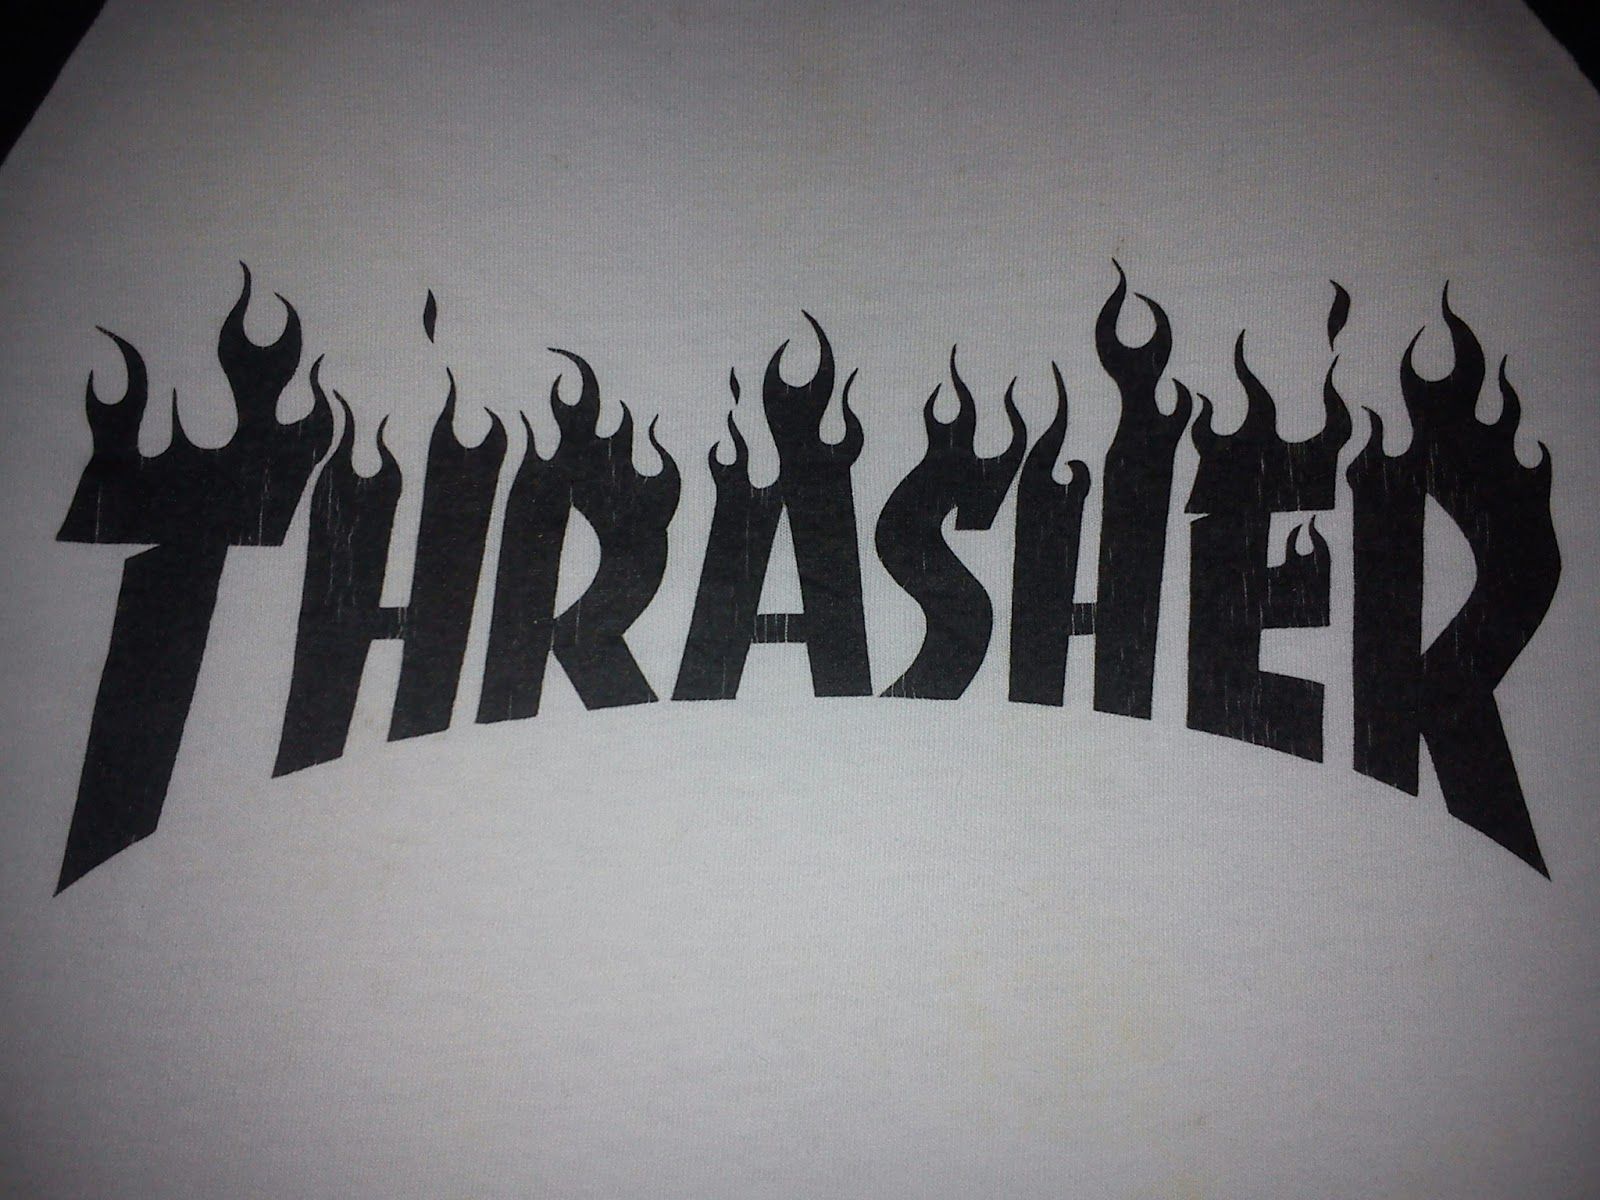 The pictures for Thrasher Logo Wallpaper